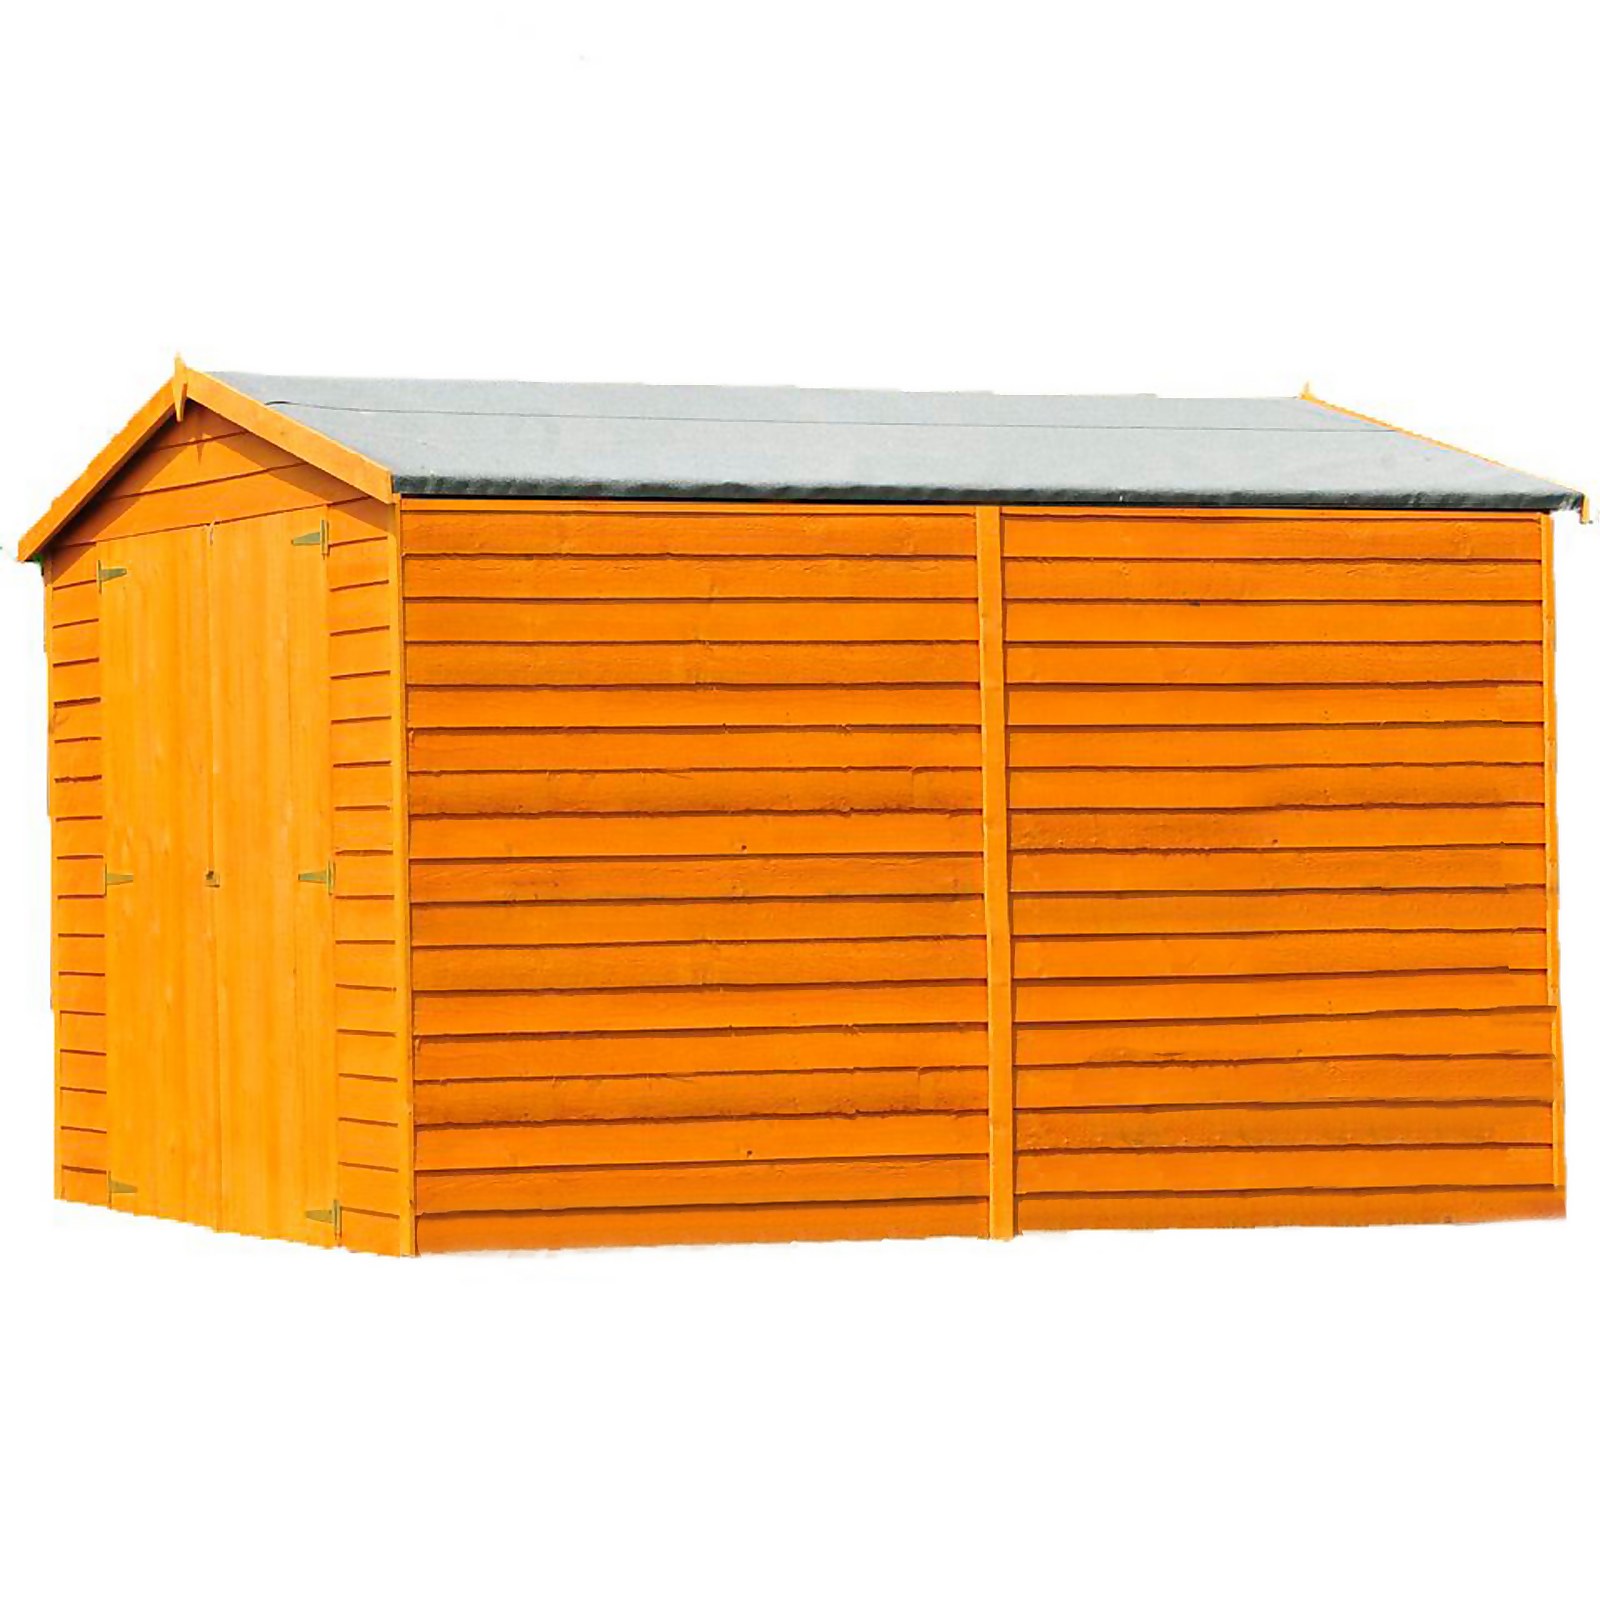 Shire 12x8ft Overlap Garden Shed No Windows - Including Installation